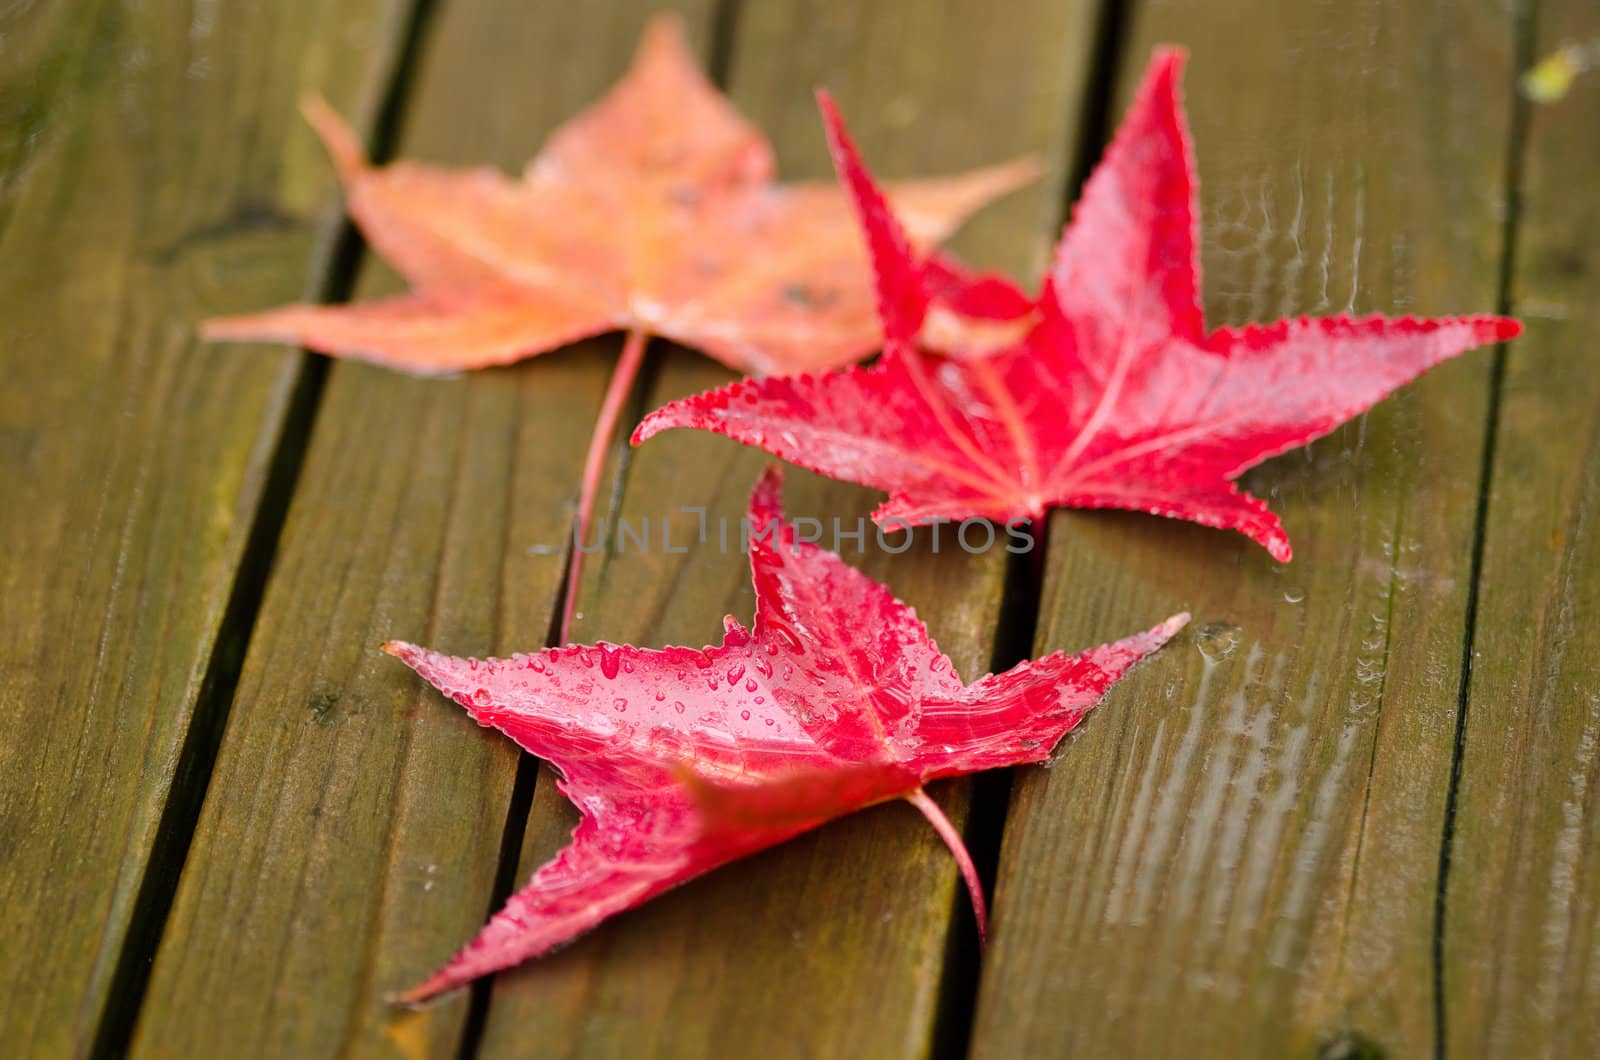 Red platanus leaves on a wooden surface in autumn, fall